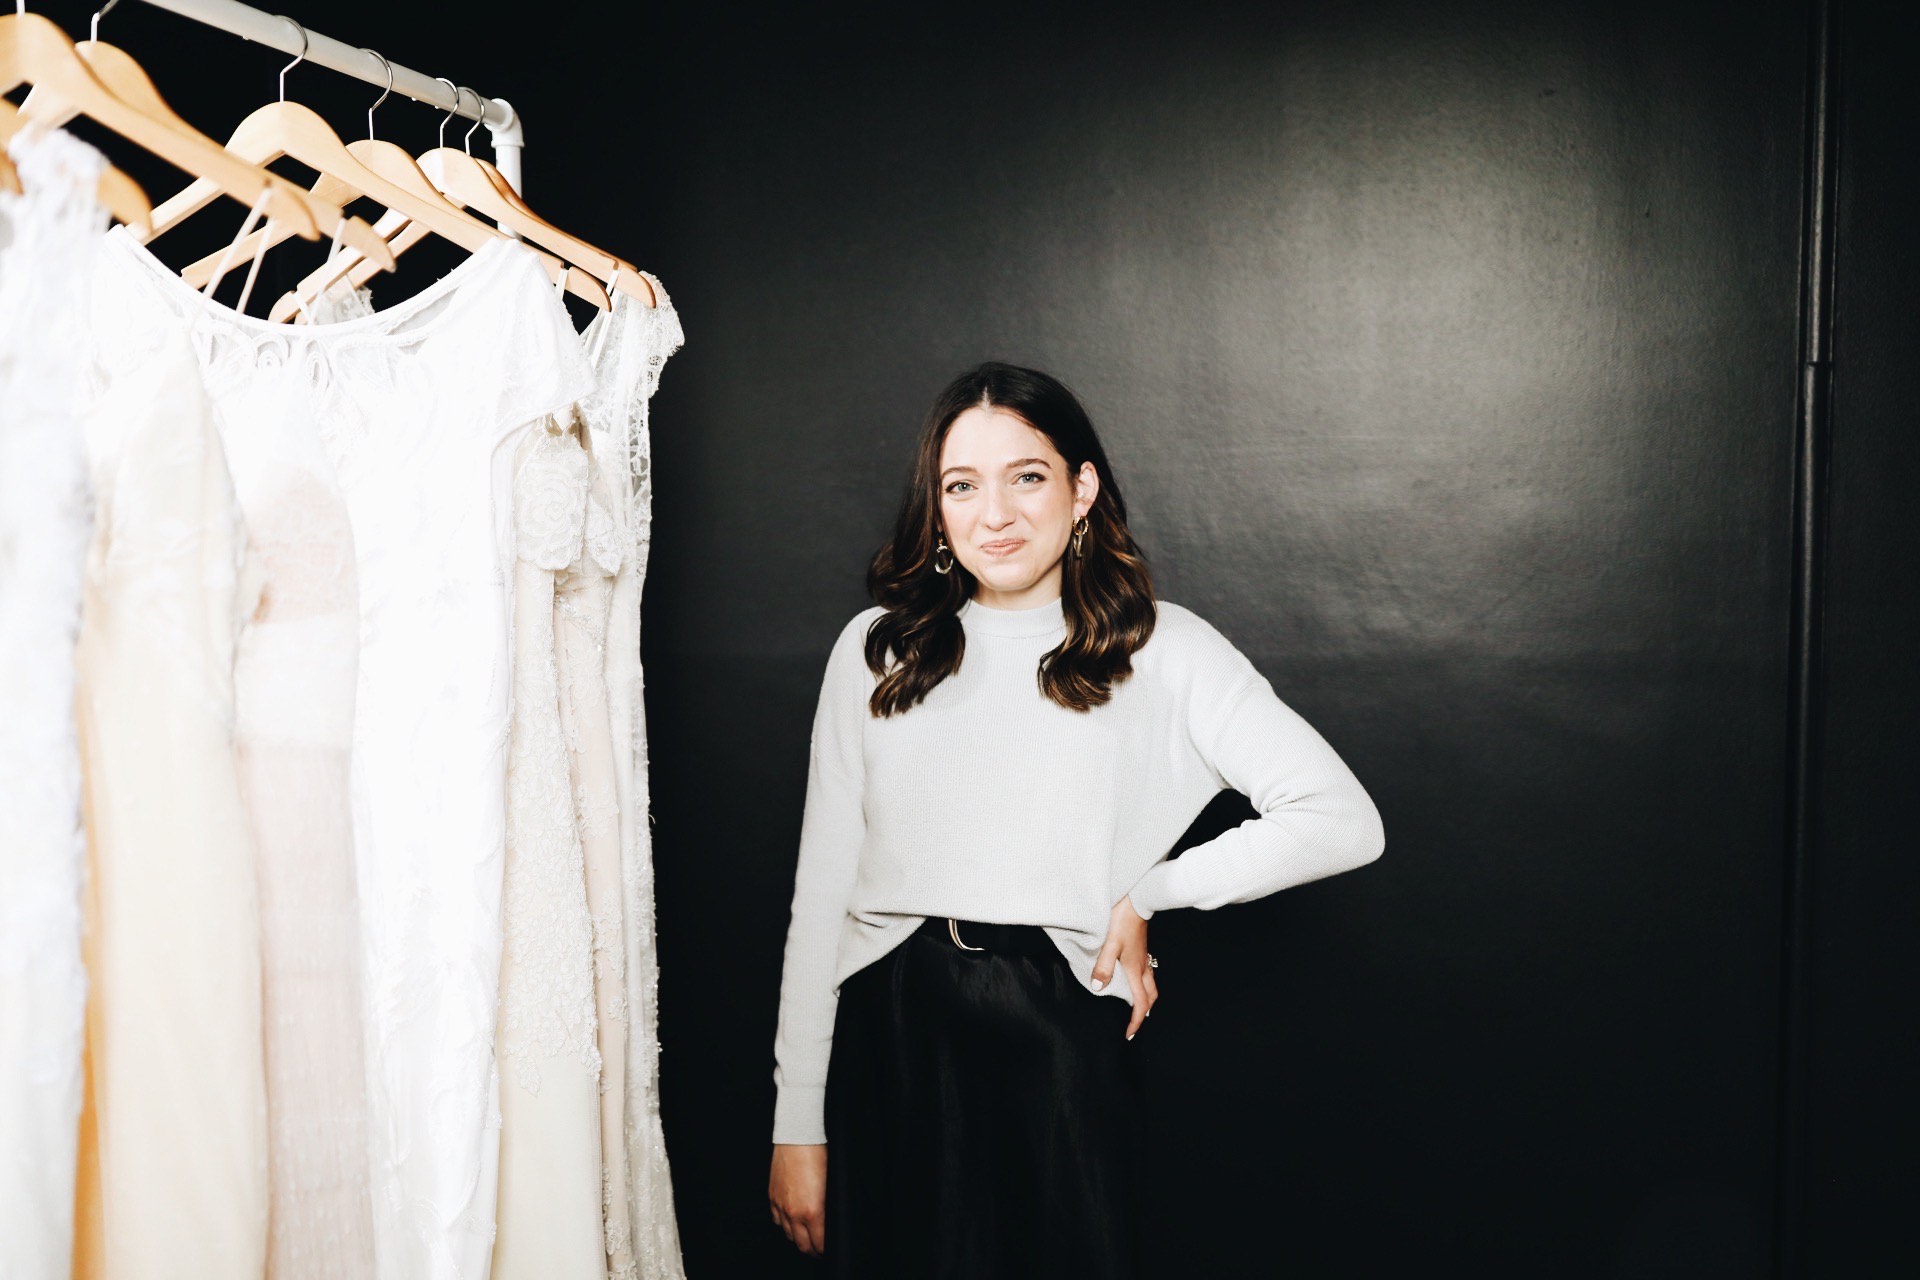 Molly Wolfberg Swarttz, owner of Glo Bridal, began devising her store while planning her own wedding.